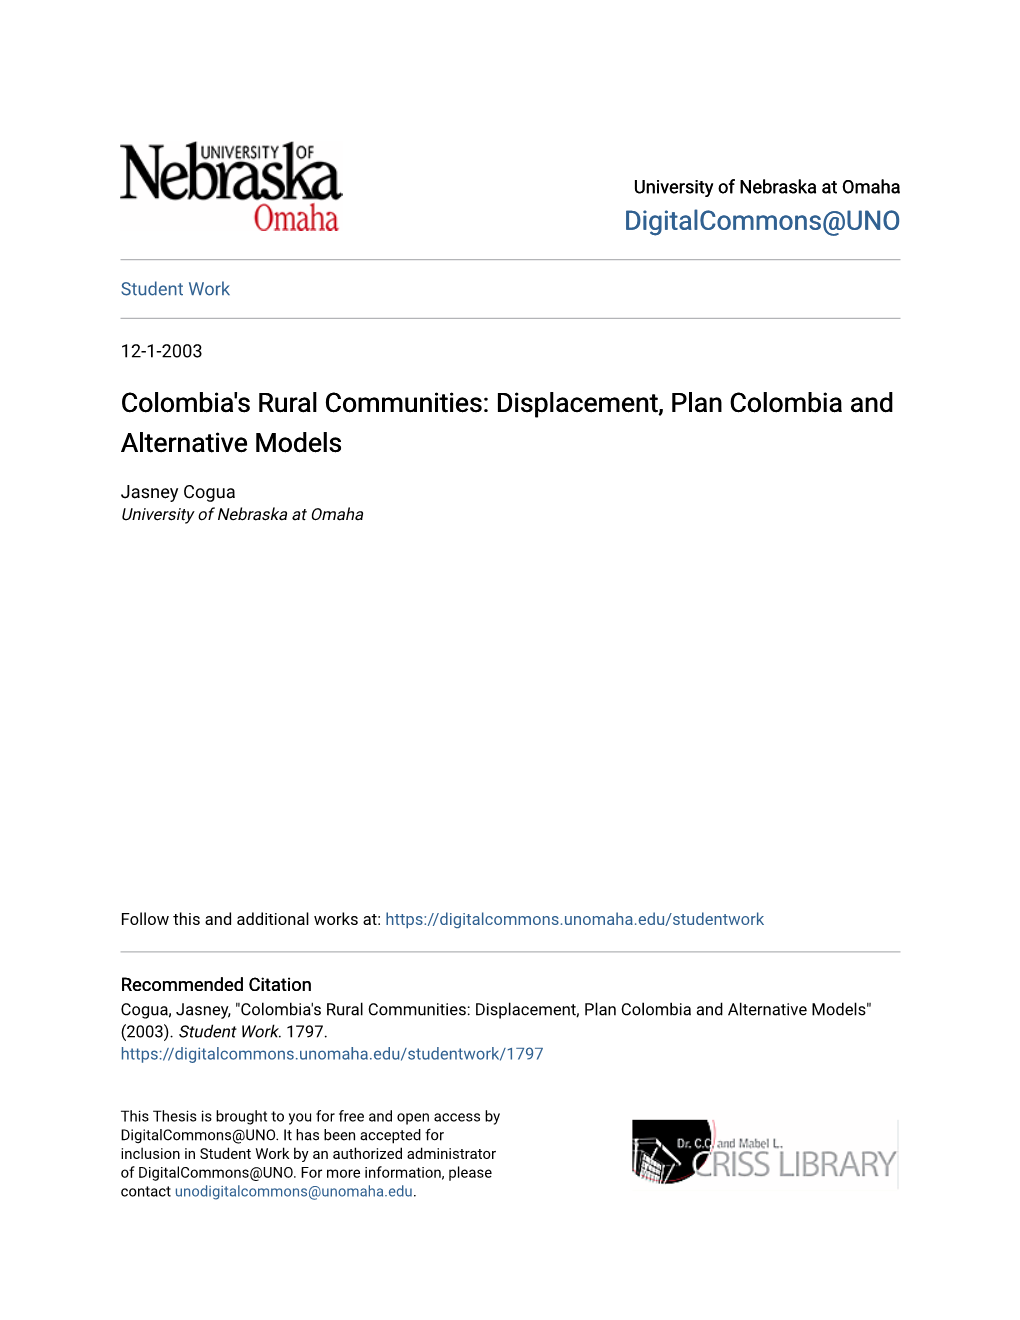 Colombia's Rural Communities: Displacement, Plan Colombia and Alternative Models